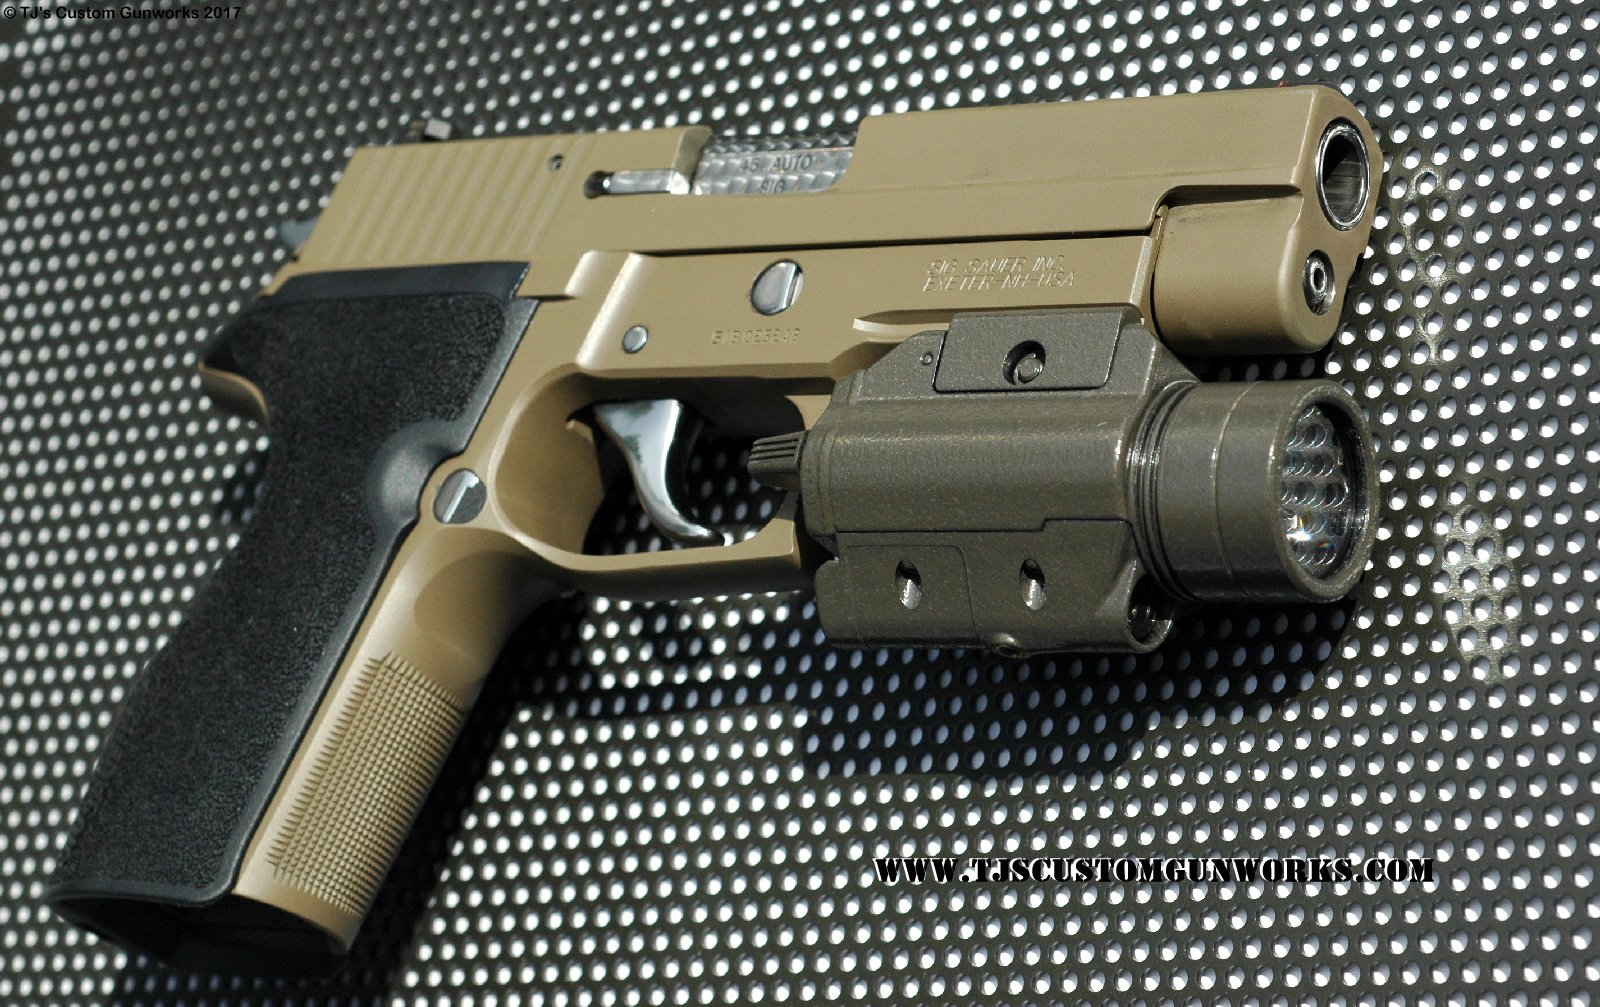 Tan Sig Sauer SigArms P227 .45 Custom Polished With FDE Brown Duracoat Surefire Light